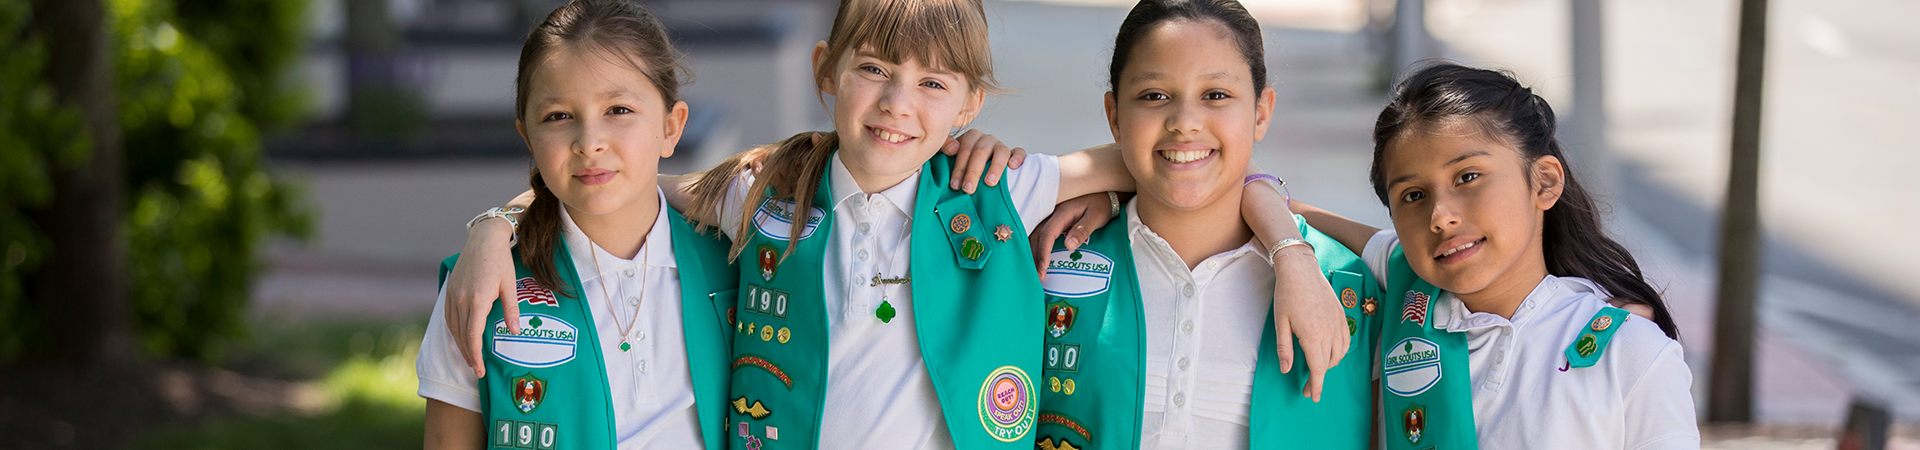  girl scout juniors posing with their arms around each other and smiling 